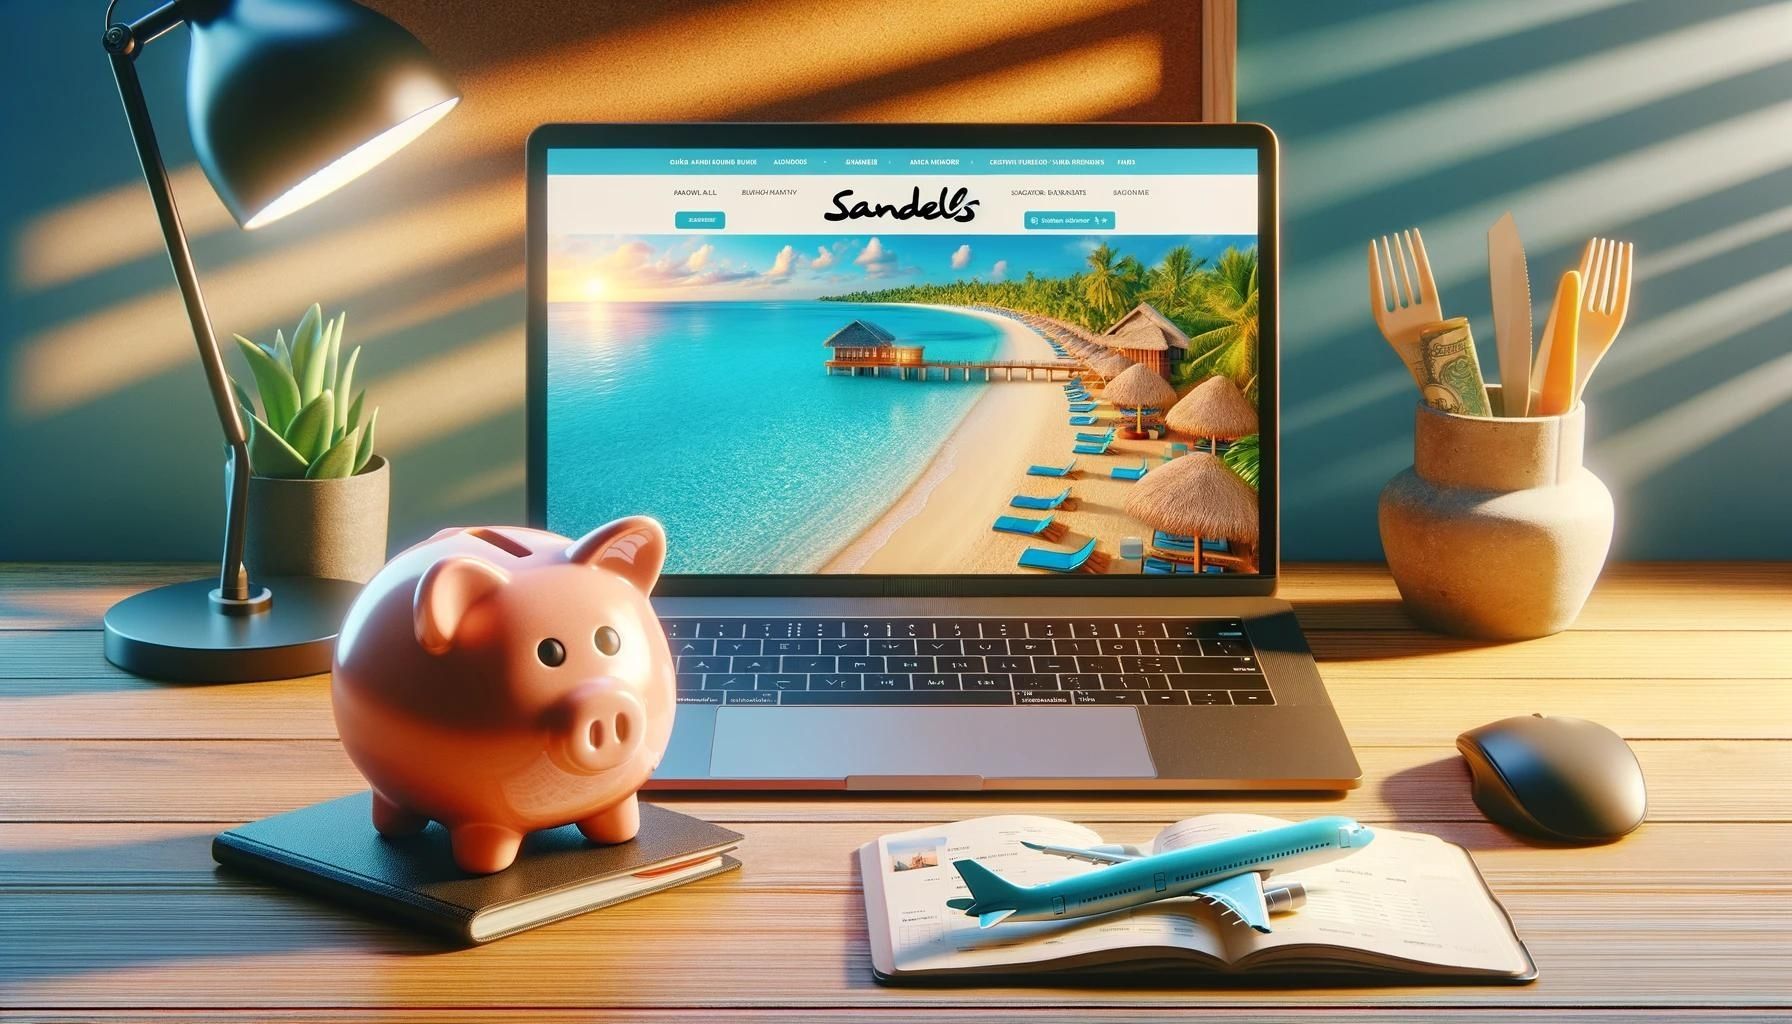 The Cheapest Way to Book a Sandals Holiday